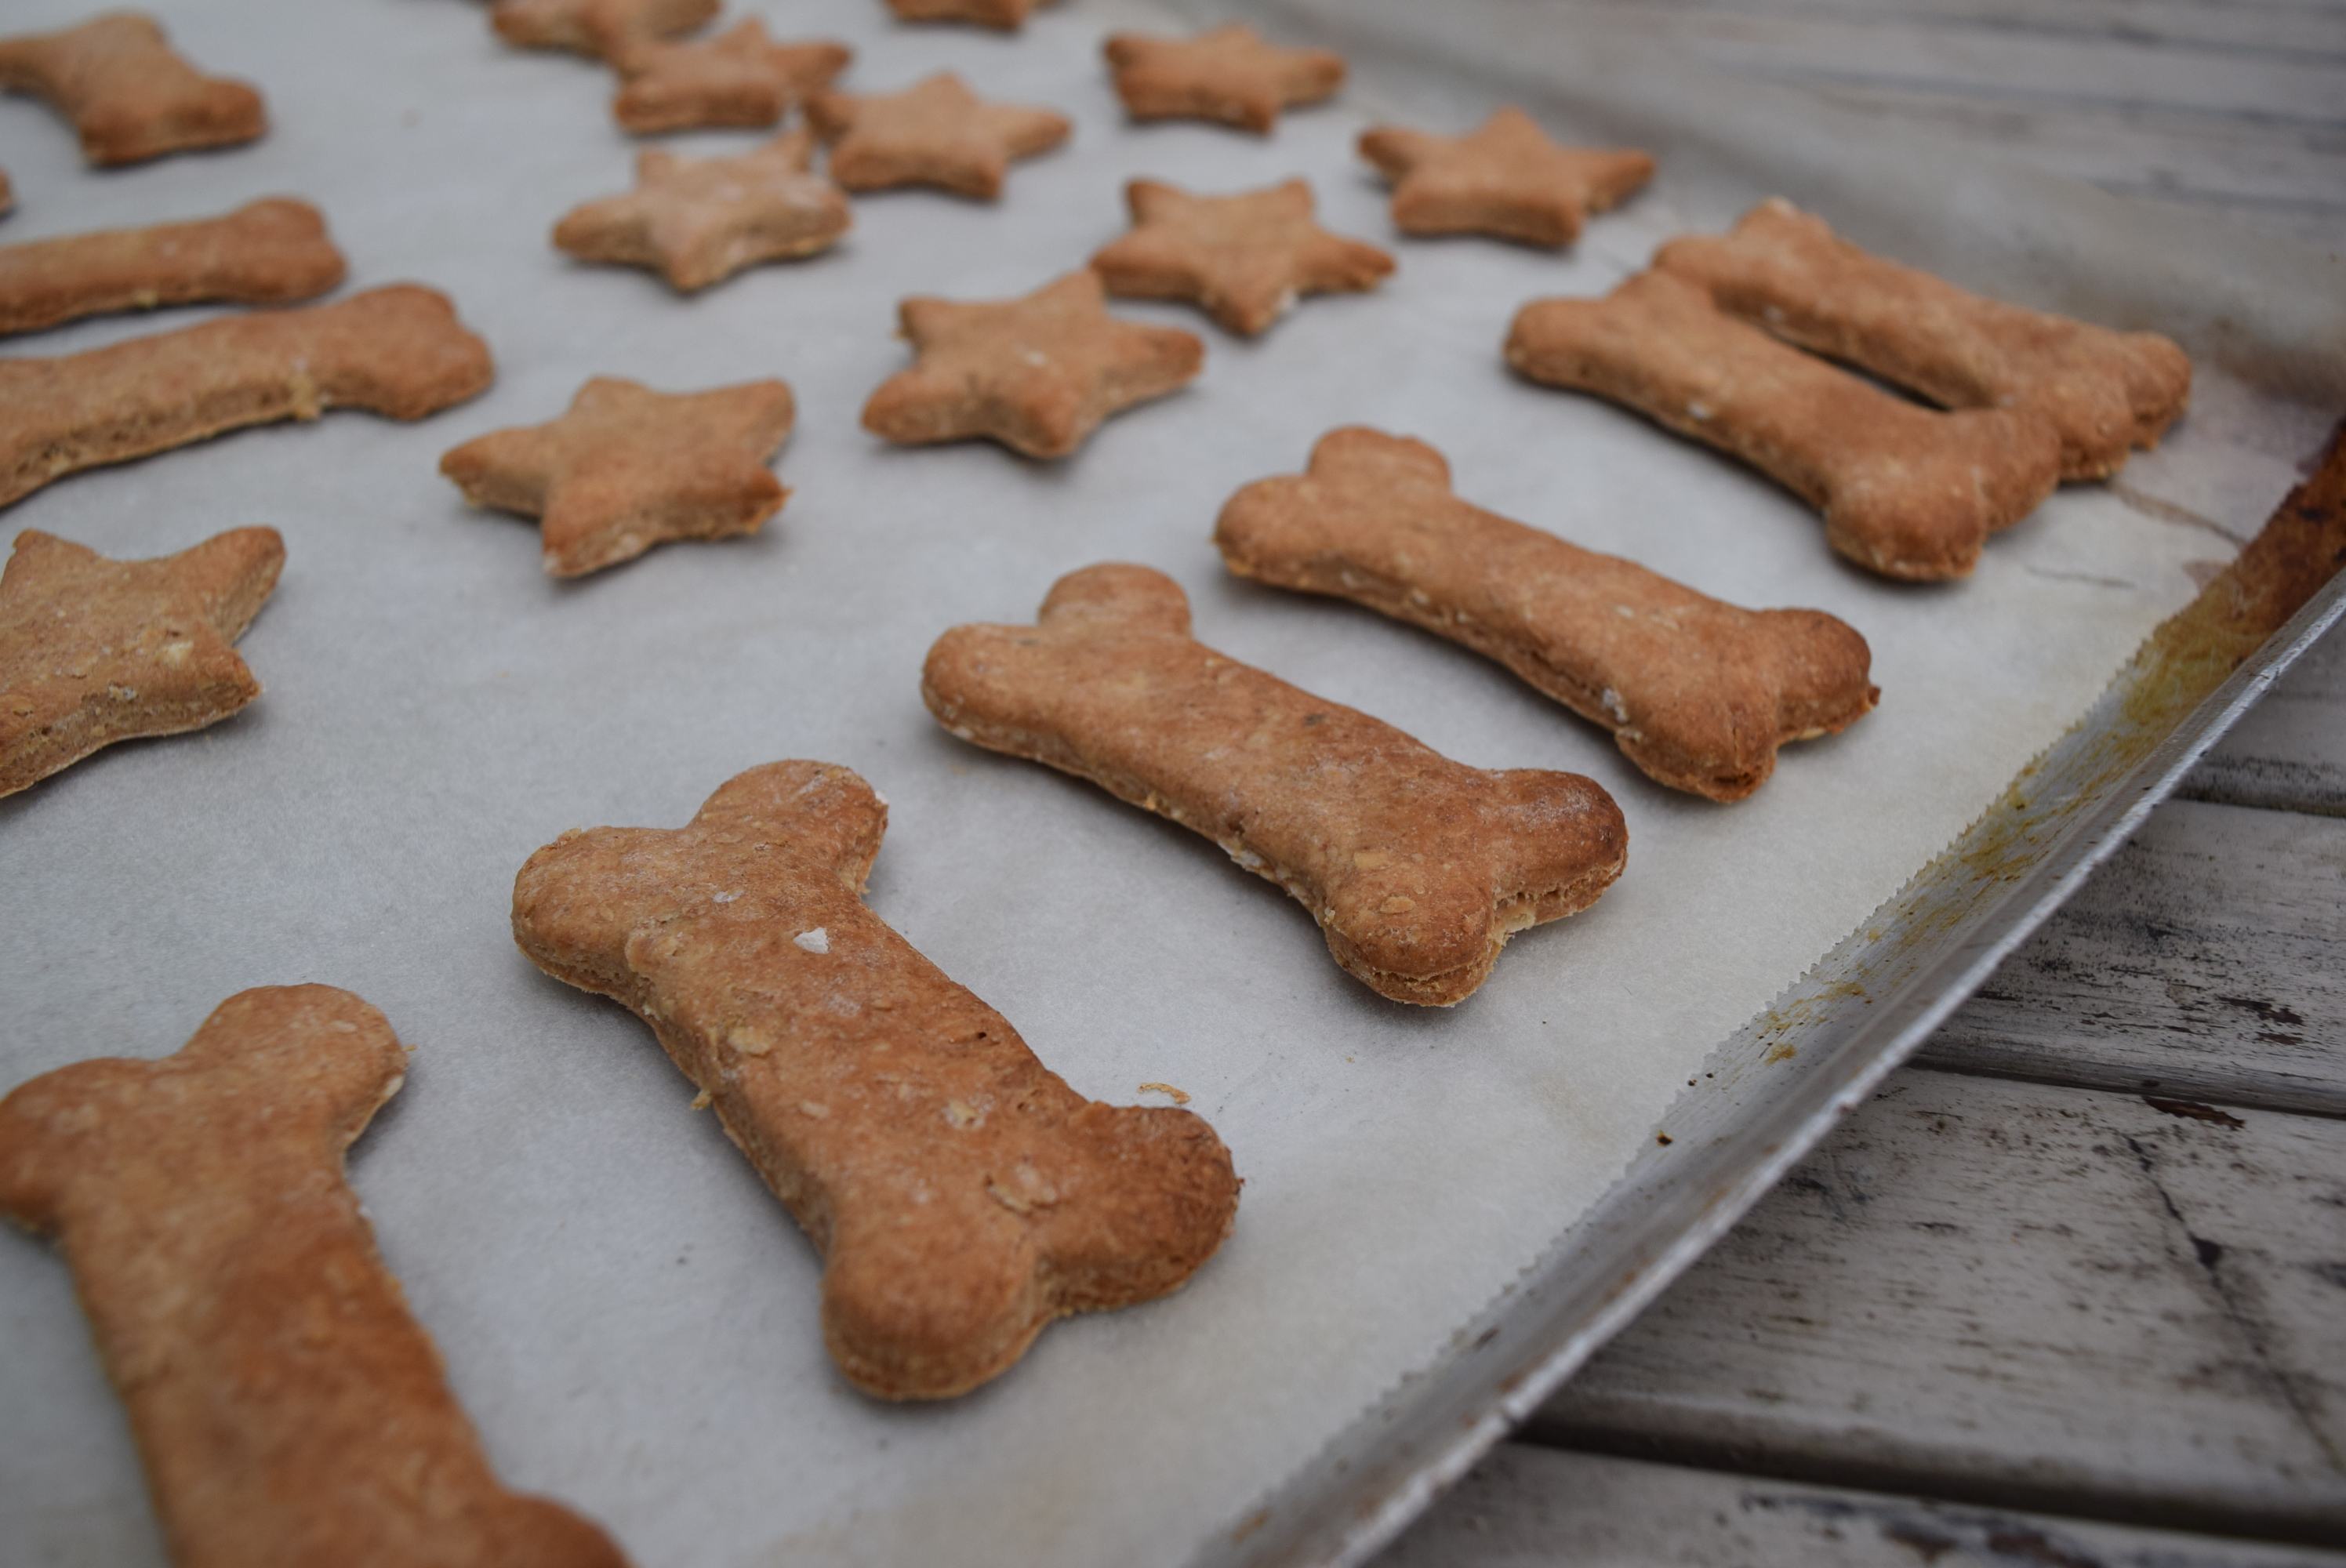 Homemade Dog Treat Toy Filling Recipe - {Not Quite} Susie Homemaker